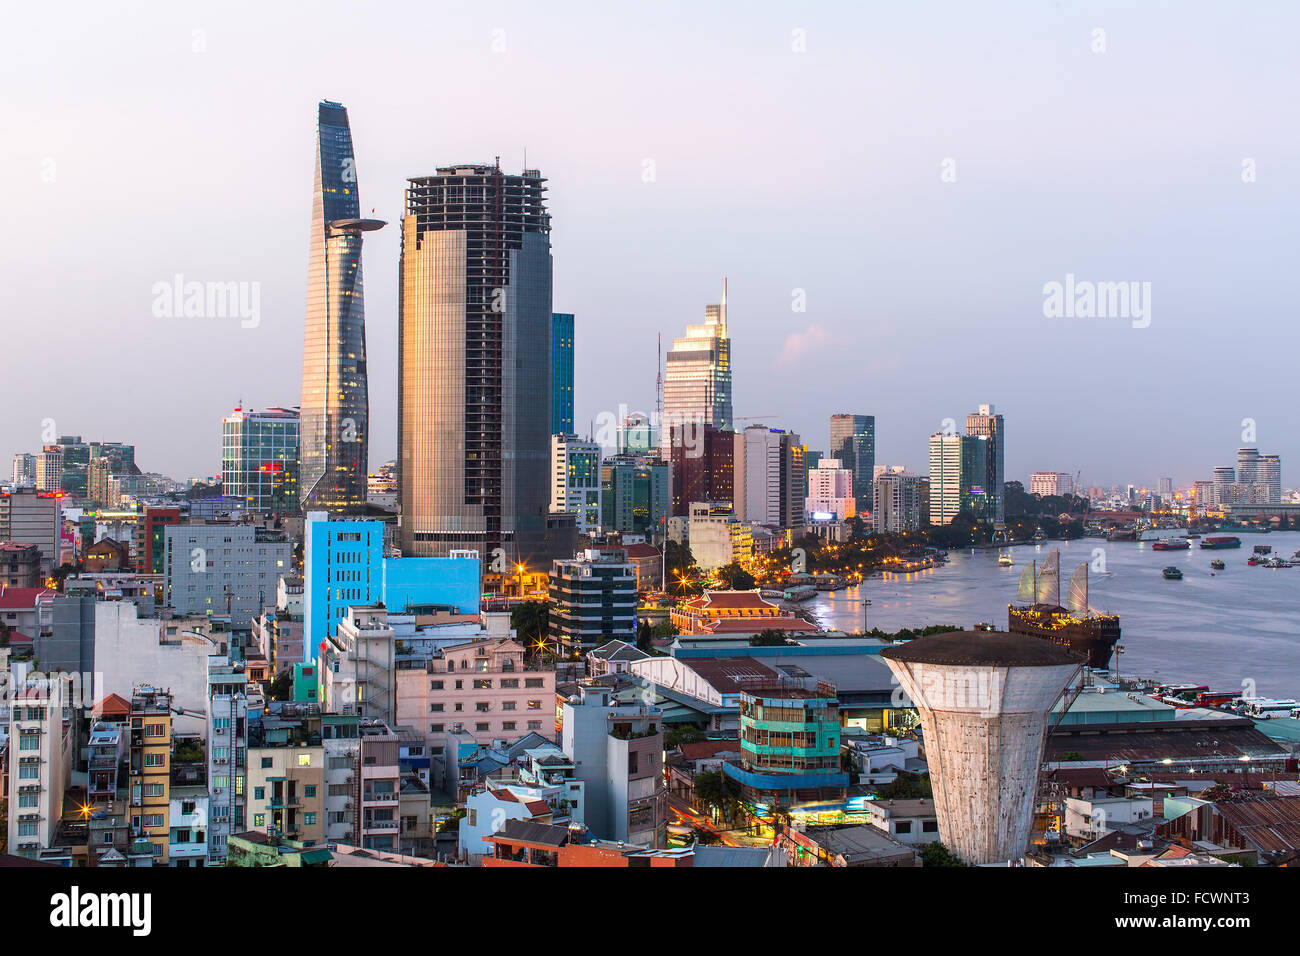 Top view of Ho Chi Minh City (Saigon) in the evening. Stock Photo